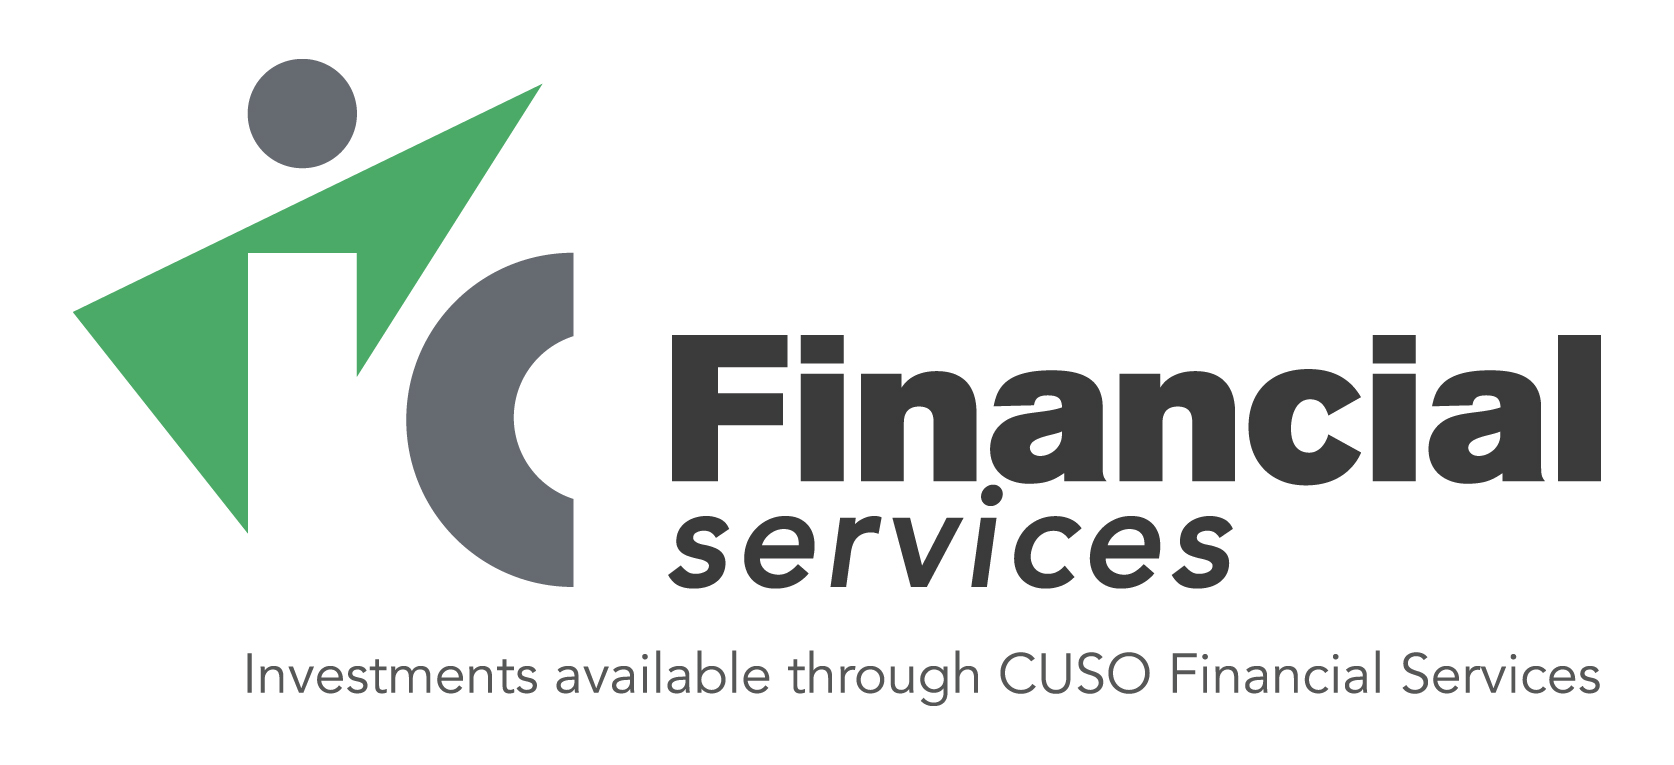 IC Financial Services logo